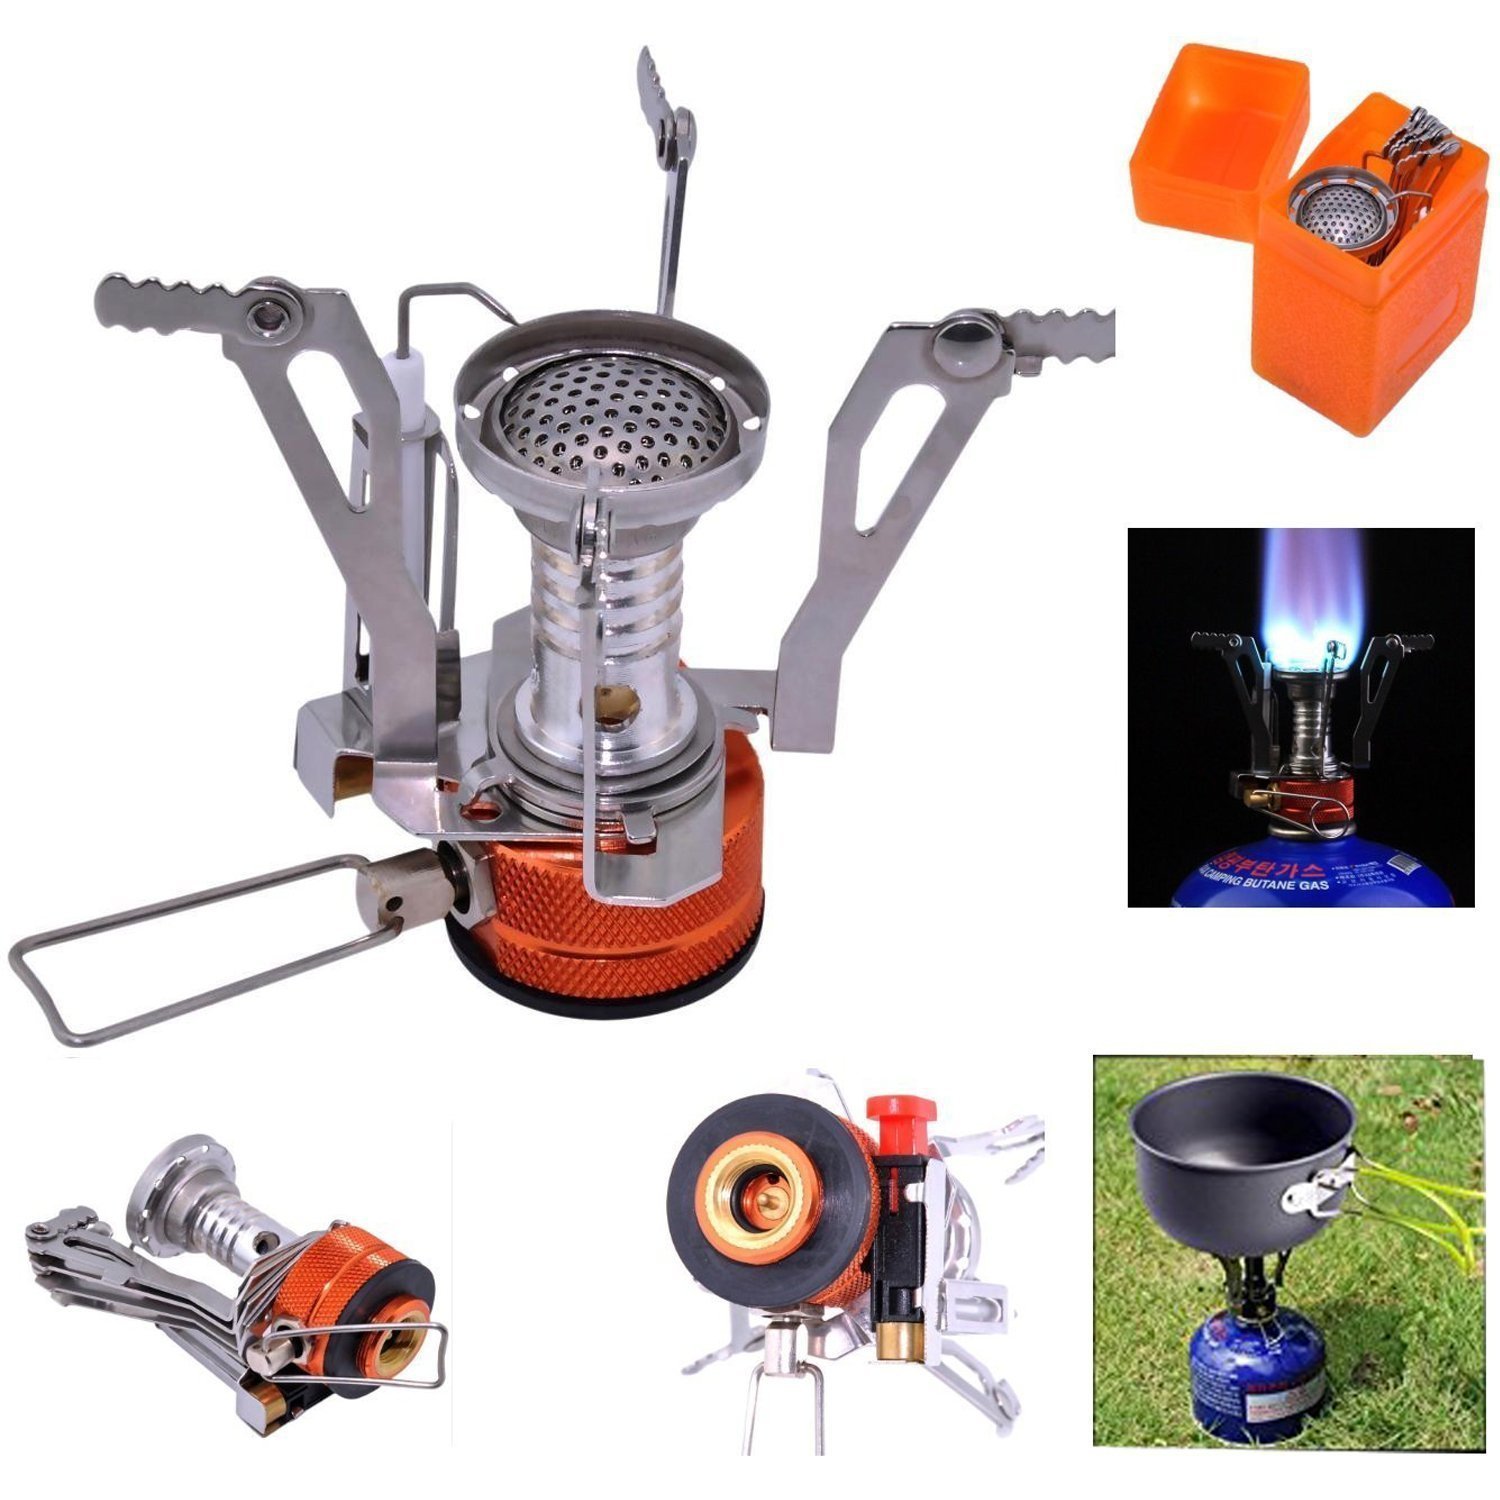 GL Portable Light Outdoor Camping Cookware Sets Gas Stove with Foldable Tableware Pan Dishwashing Sponge Hiking Picnic Tool 32